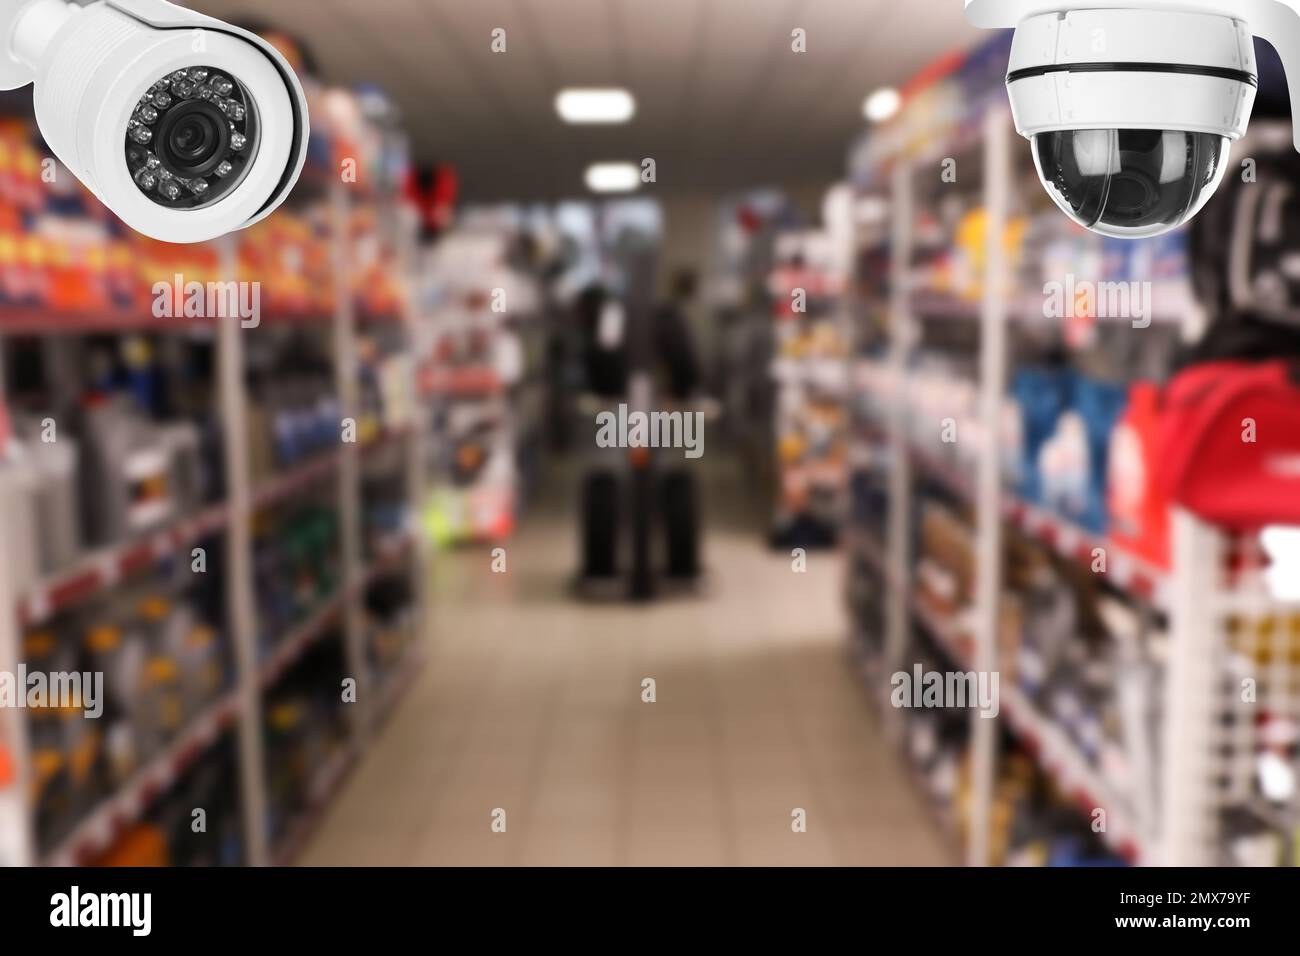 Modern CCTV security cameras in auto store. Guard equipment Stock Photo